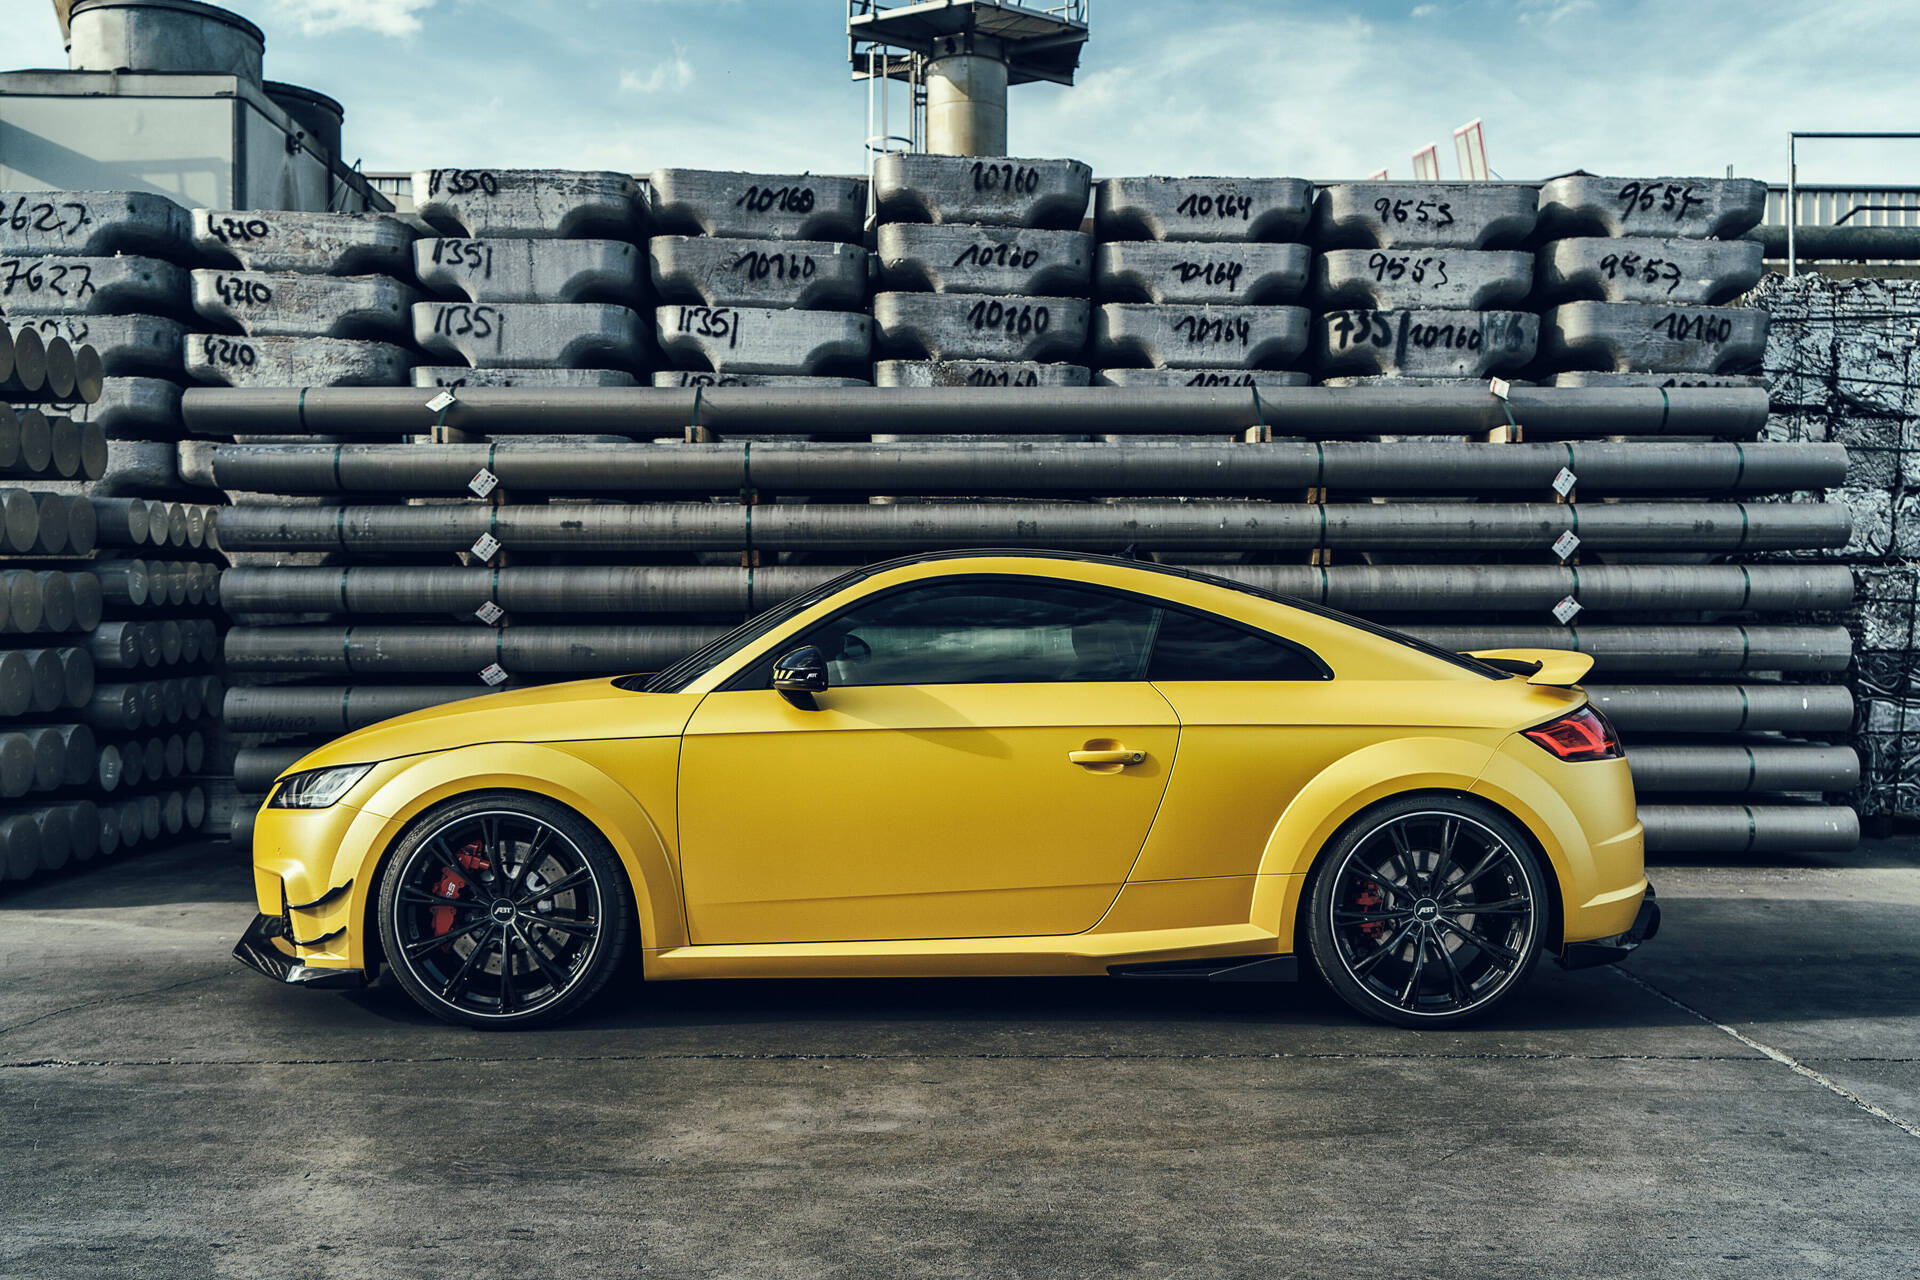 Abt Power Upgrade Wheels And Exhaust System For 2019 Audi Tt Rs Abt Sportsline